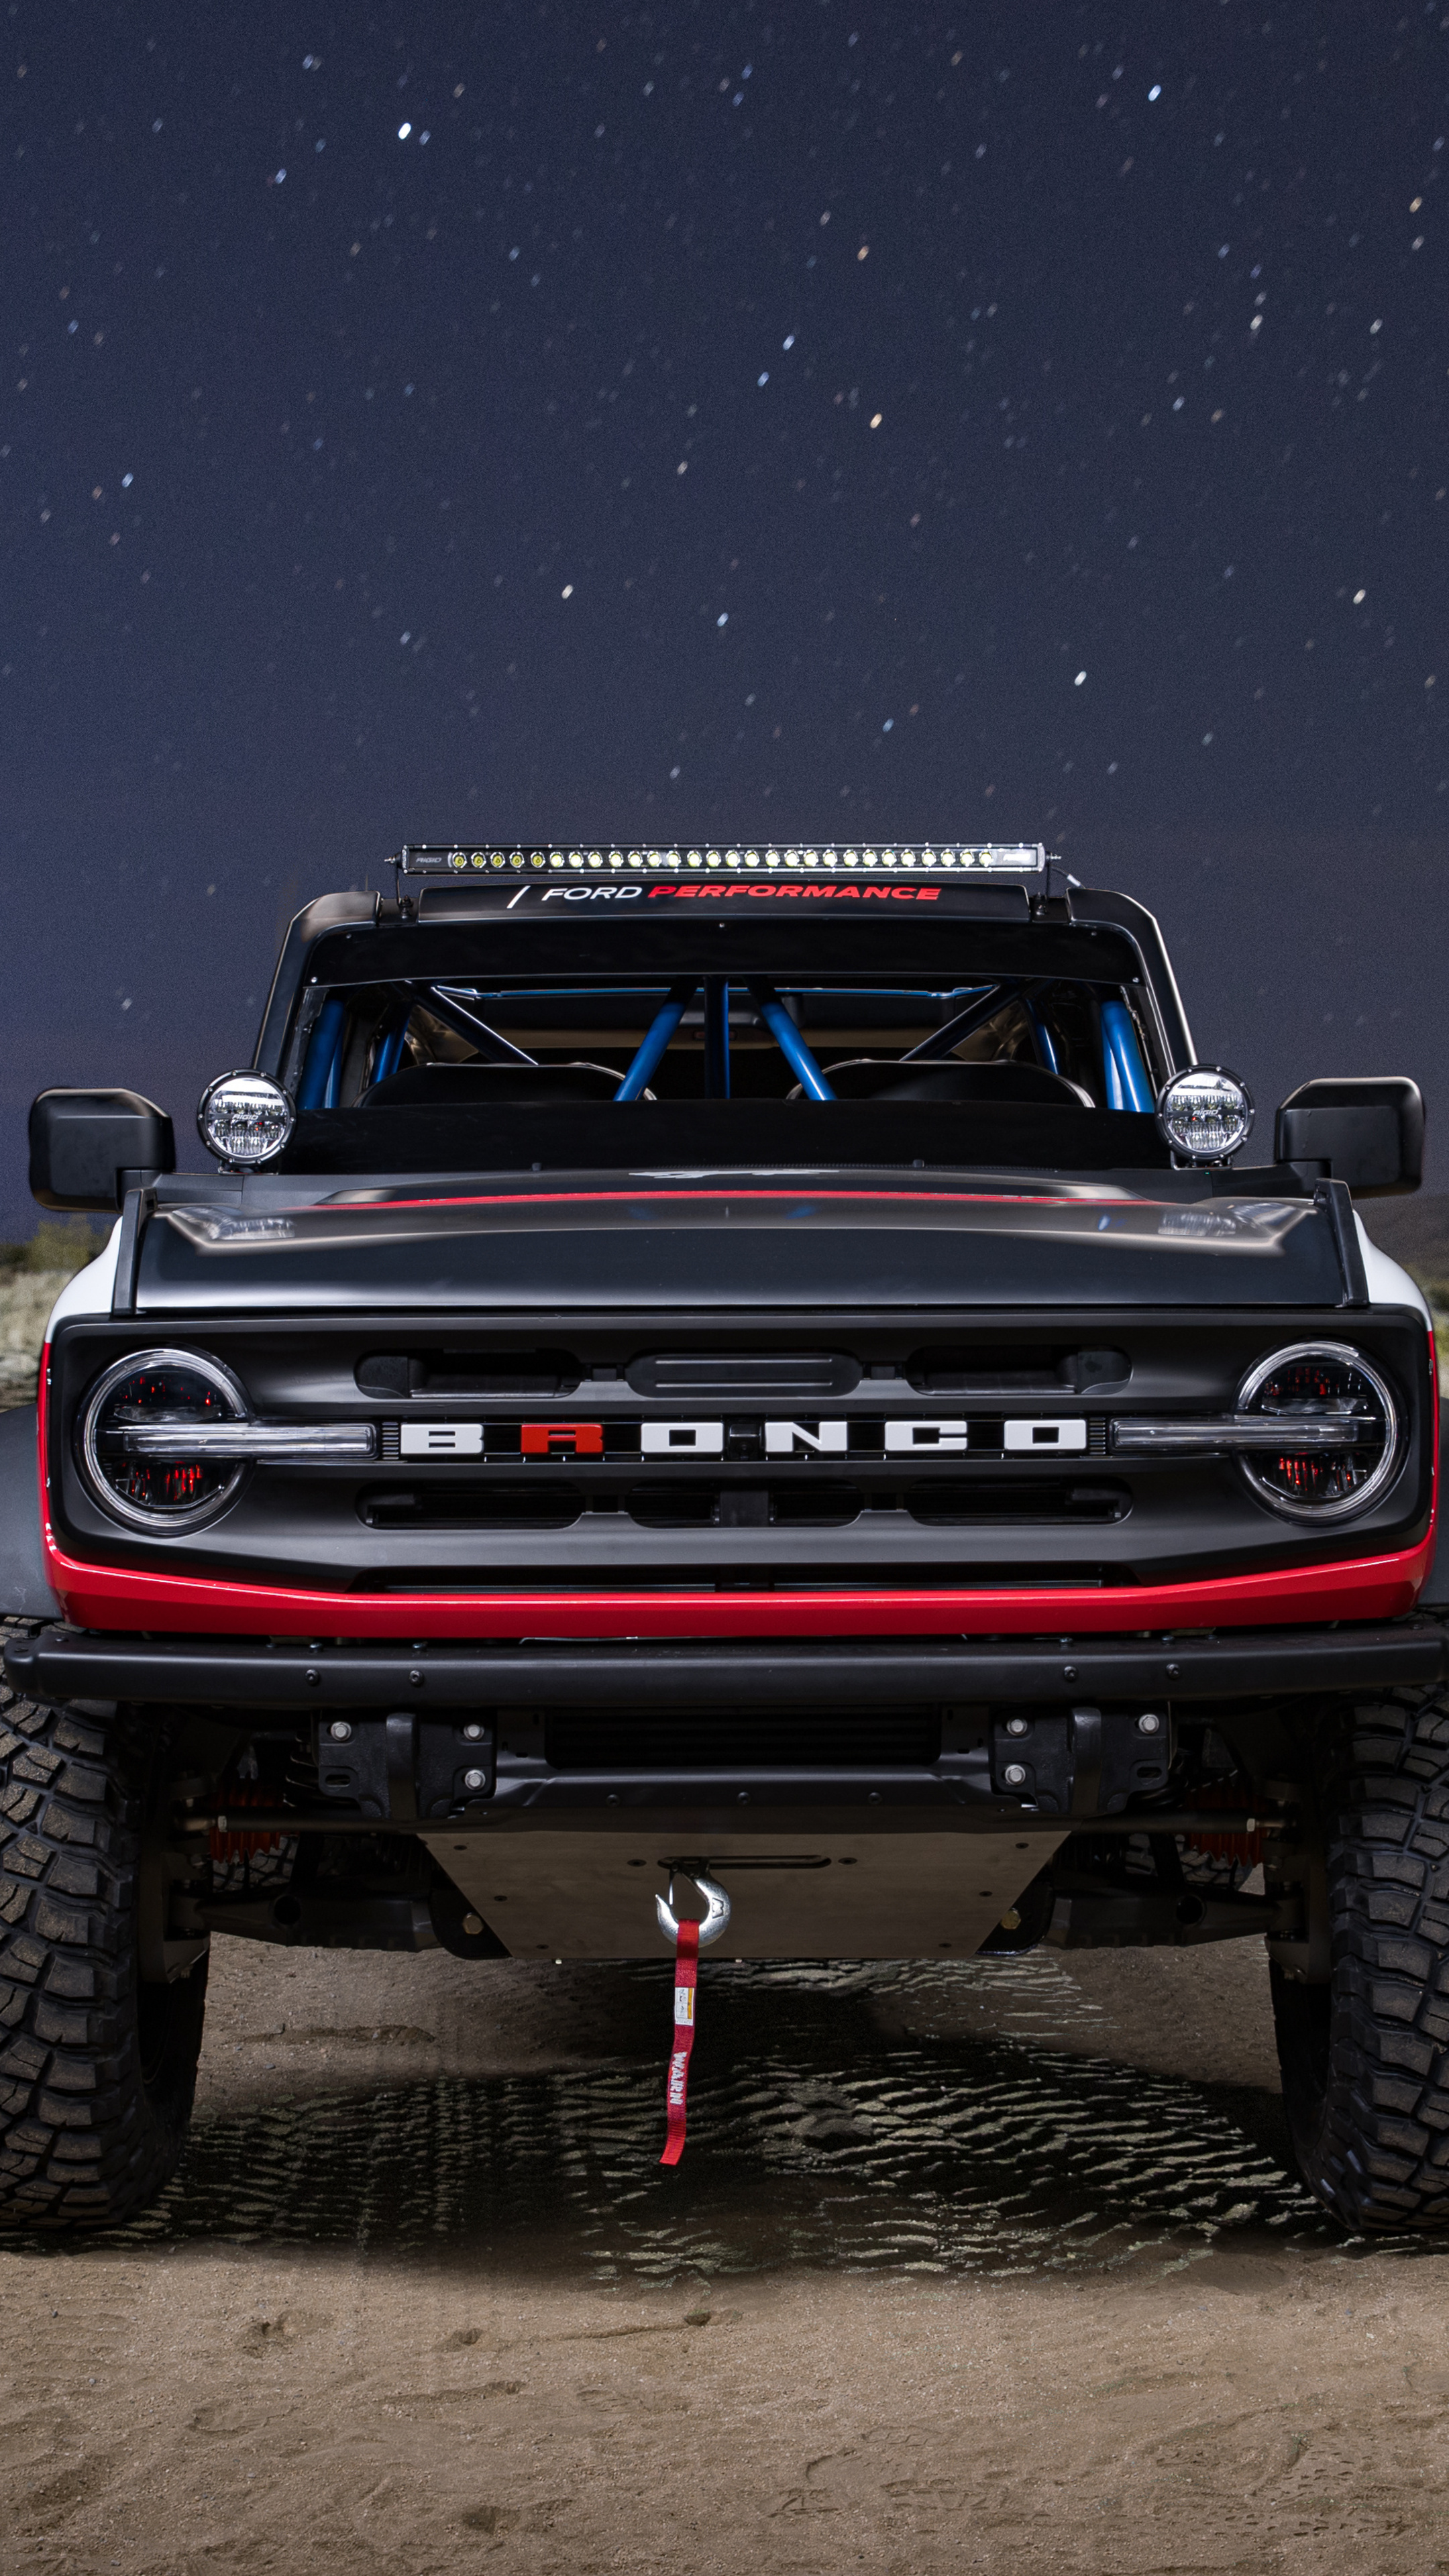 Ford Bronco: Ford 4600 ULTRA4, Race Truck, Johnson Valley, King of the Hammers, 2021. 2160x3840 4K Wallpaper.